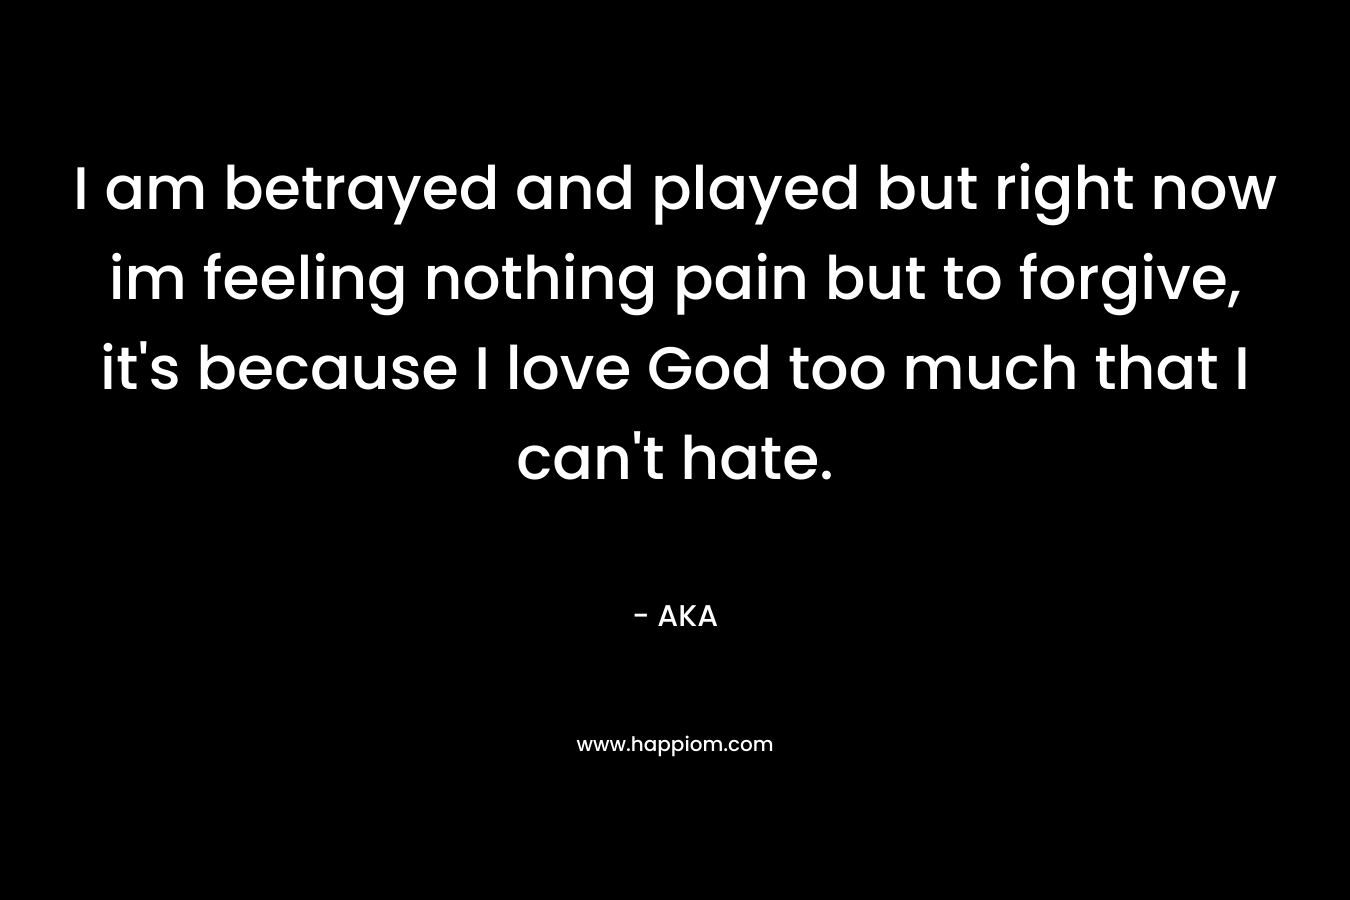 I am betrayed and played but right now im feeling nothing pain but to forgive, it's because I love God too much that I can't hate.